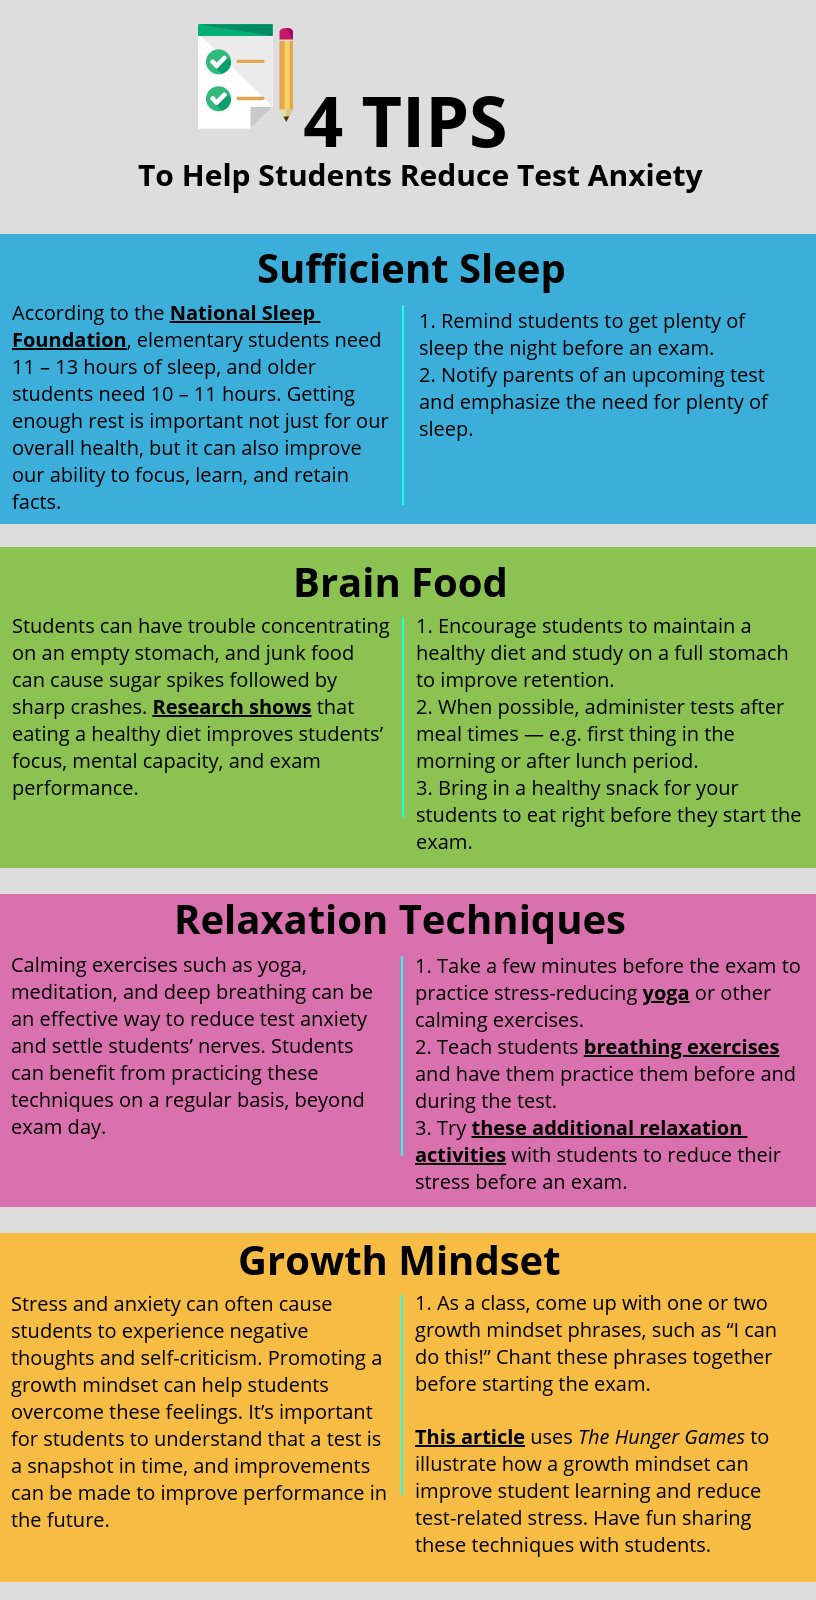 4 Tips for Reducing Test Anxiety in Middle School Students